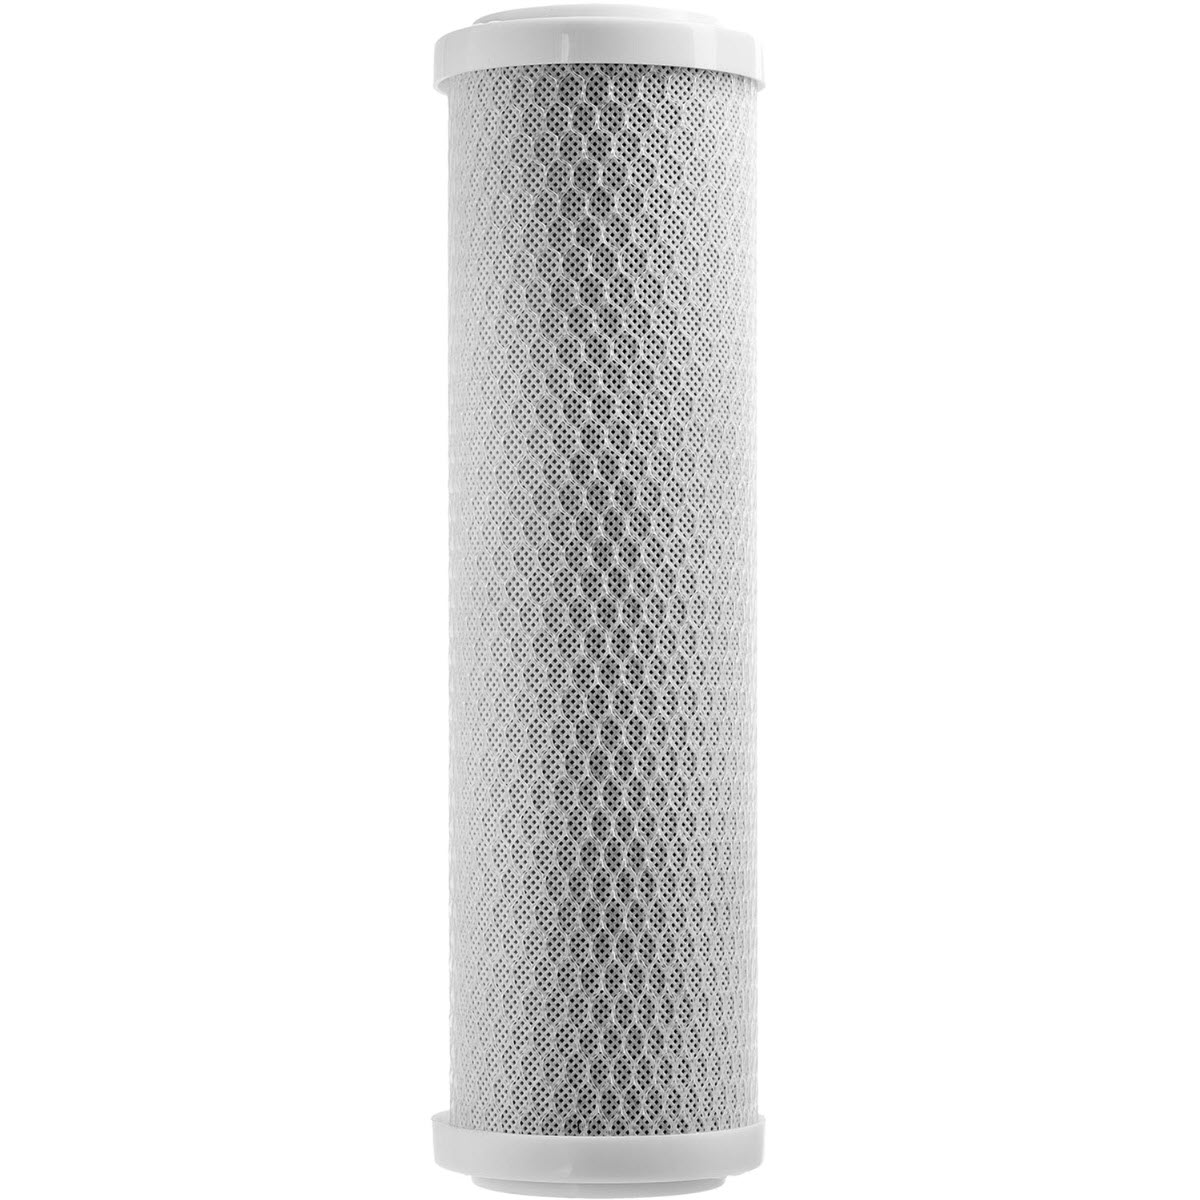 ProTool Carbon Filter 4.5in x 20in Housing 5 Micron Sediment Filter Questions & Answers